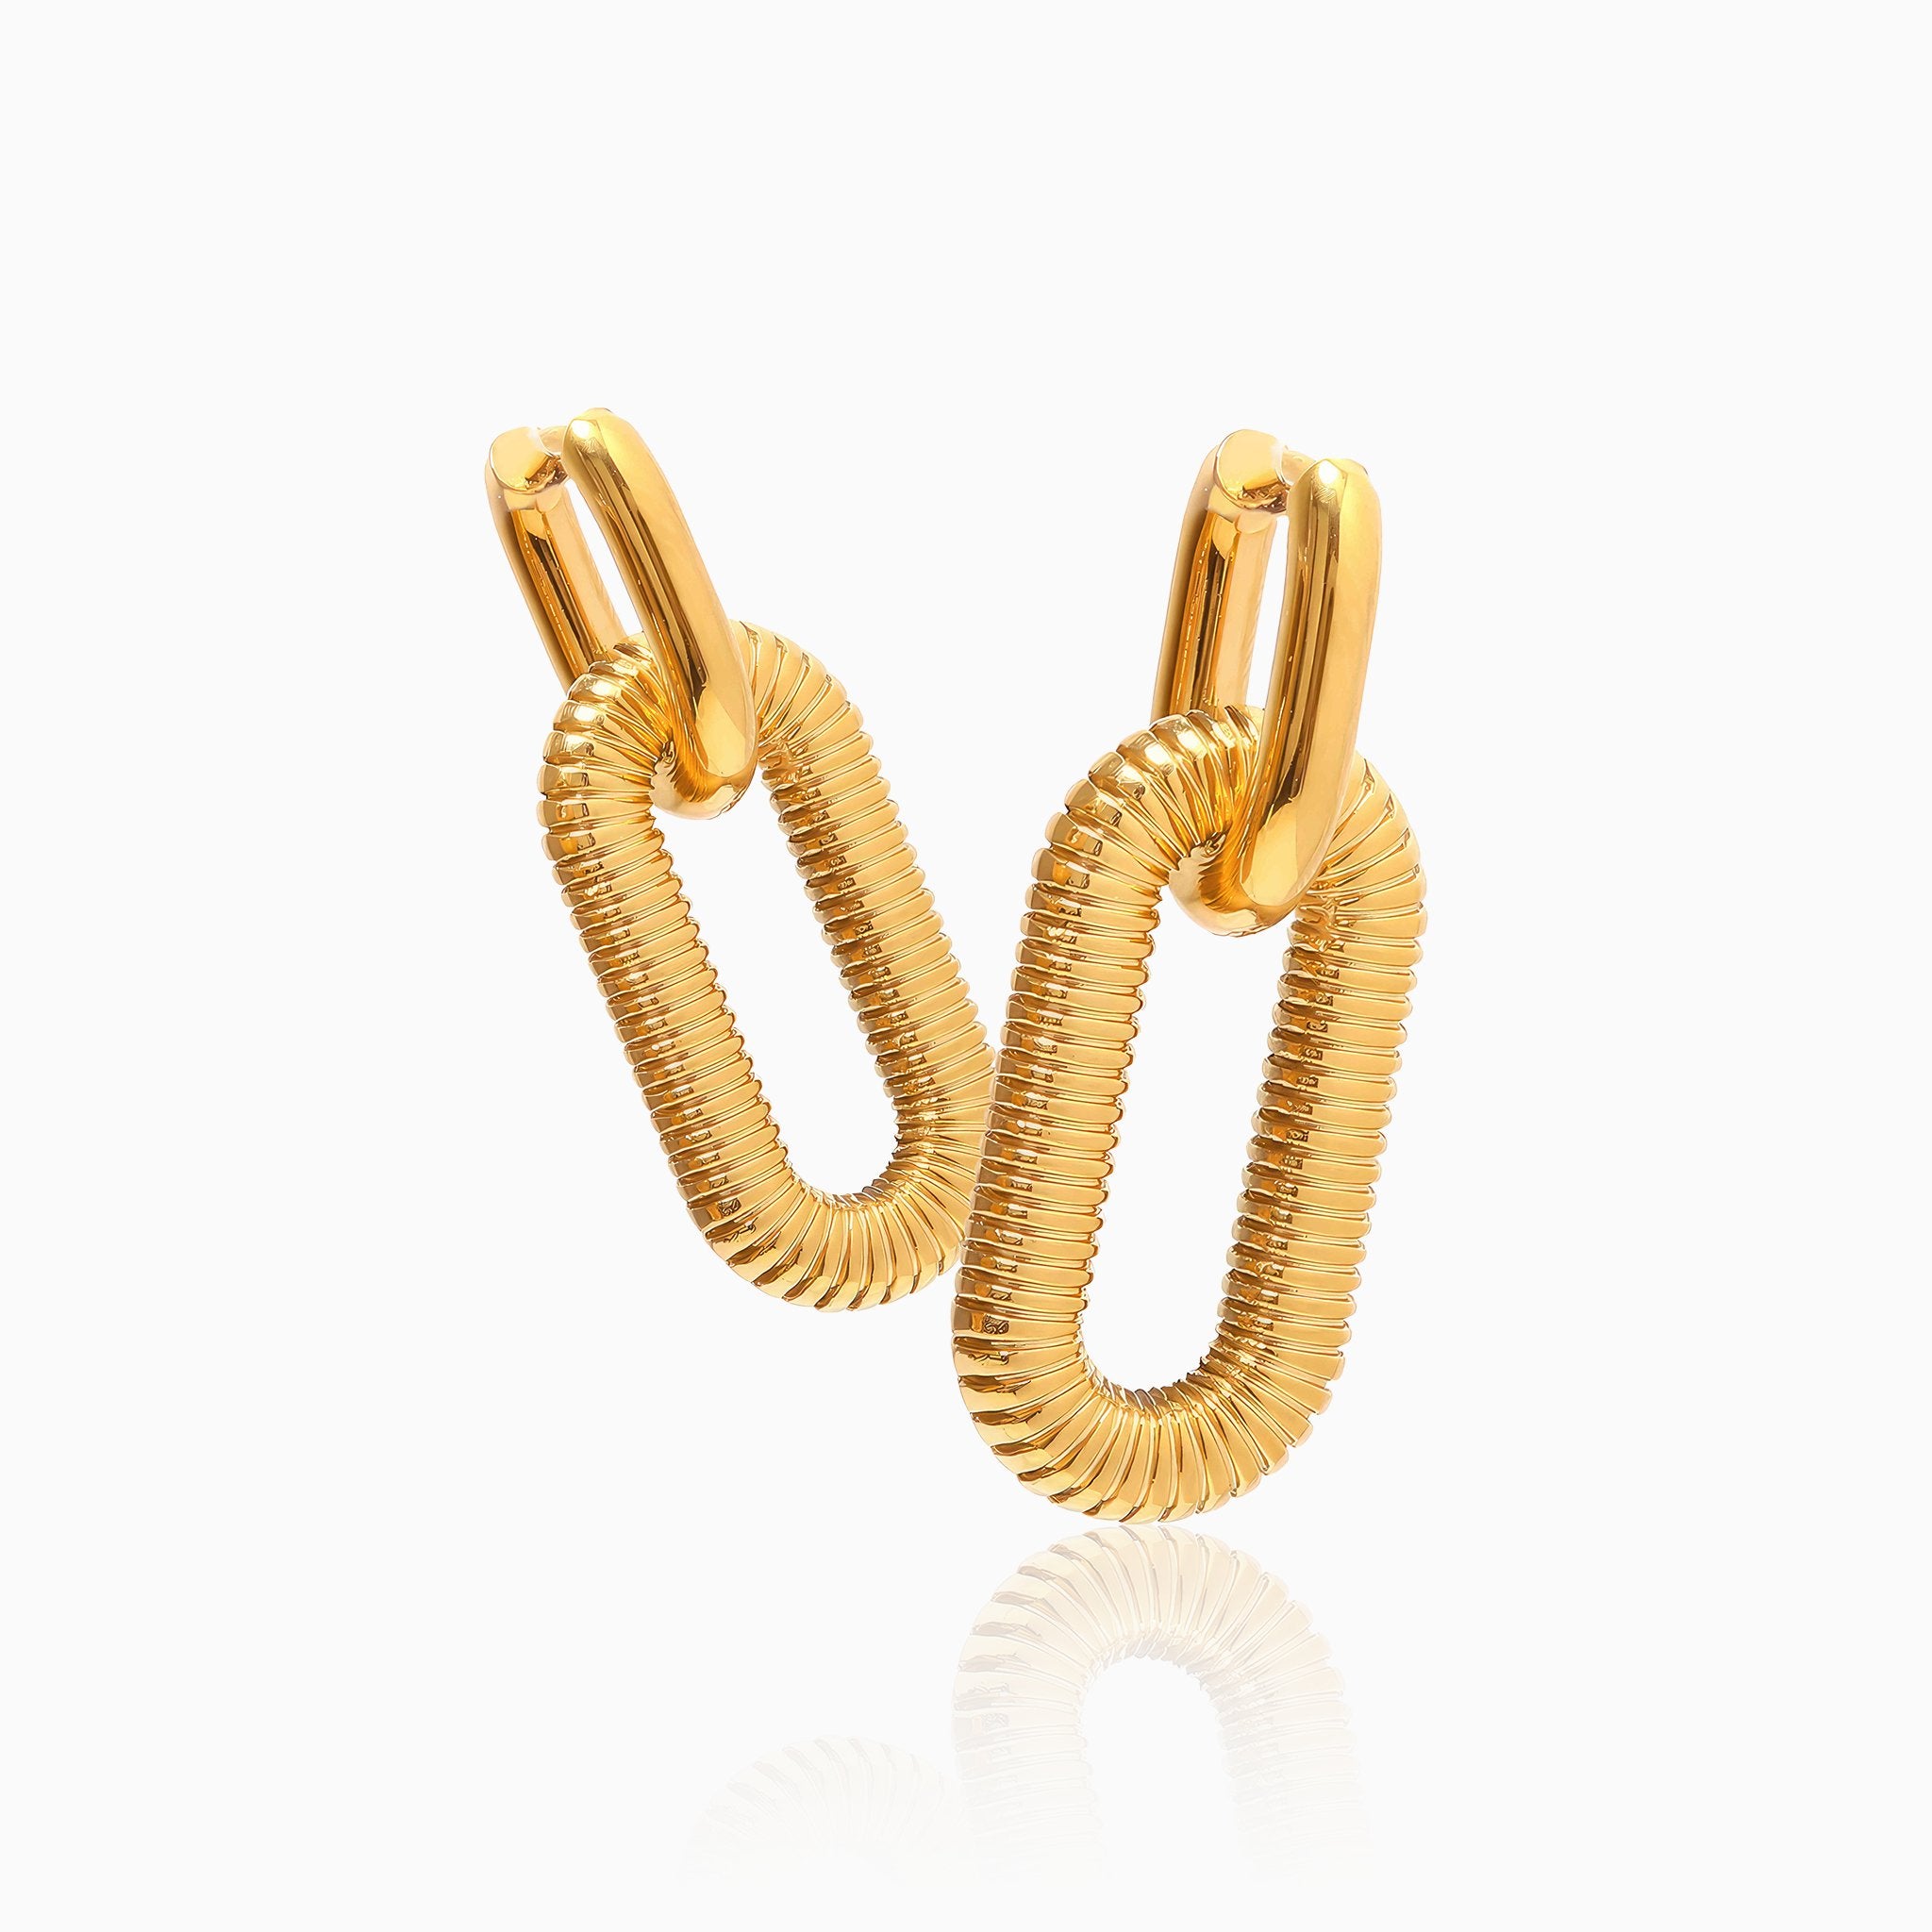 Chain Pendant Earrings with Geometric Design - Nobbier - Earrings - 18K Gold And Titanium PVD Coated Jewelry